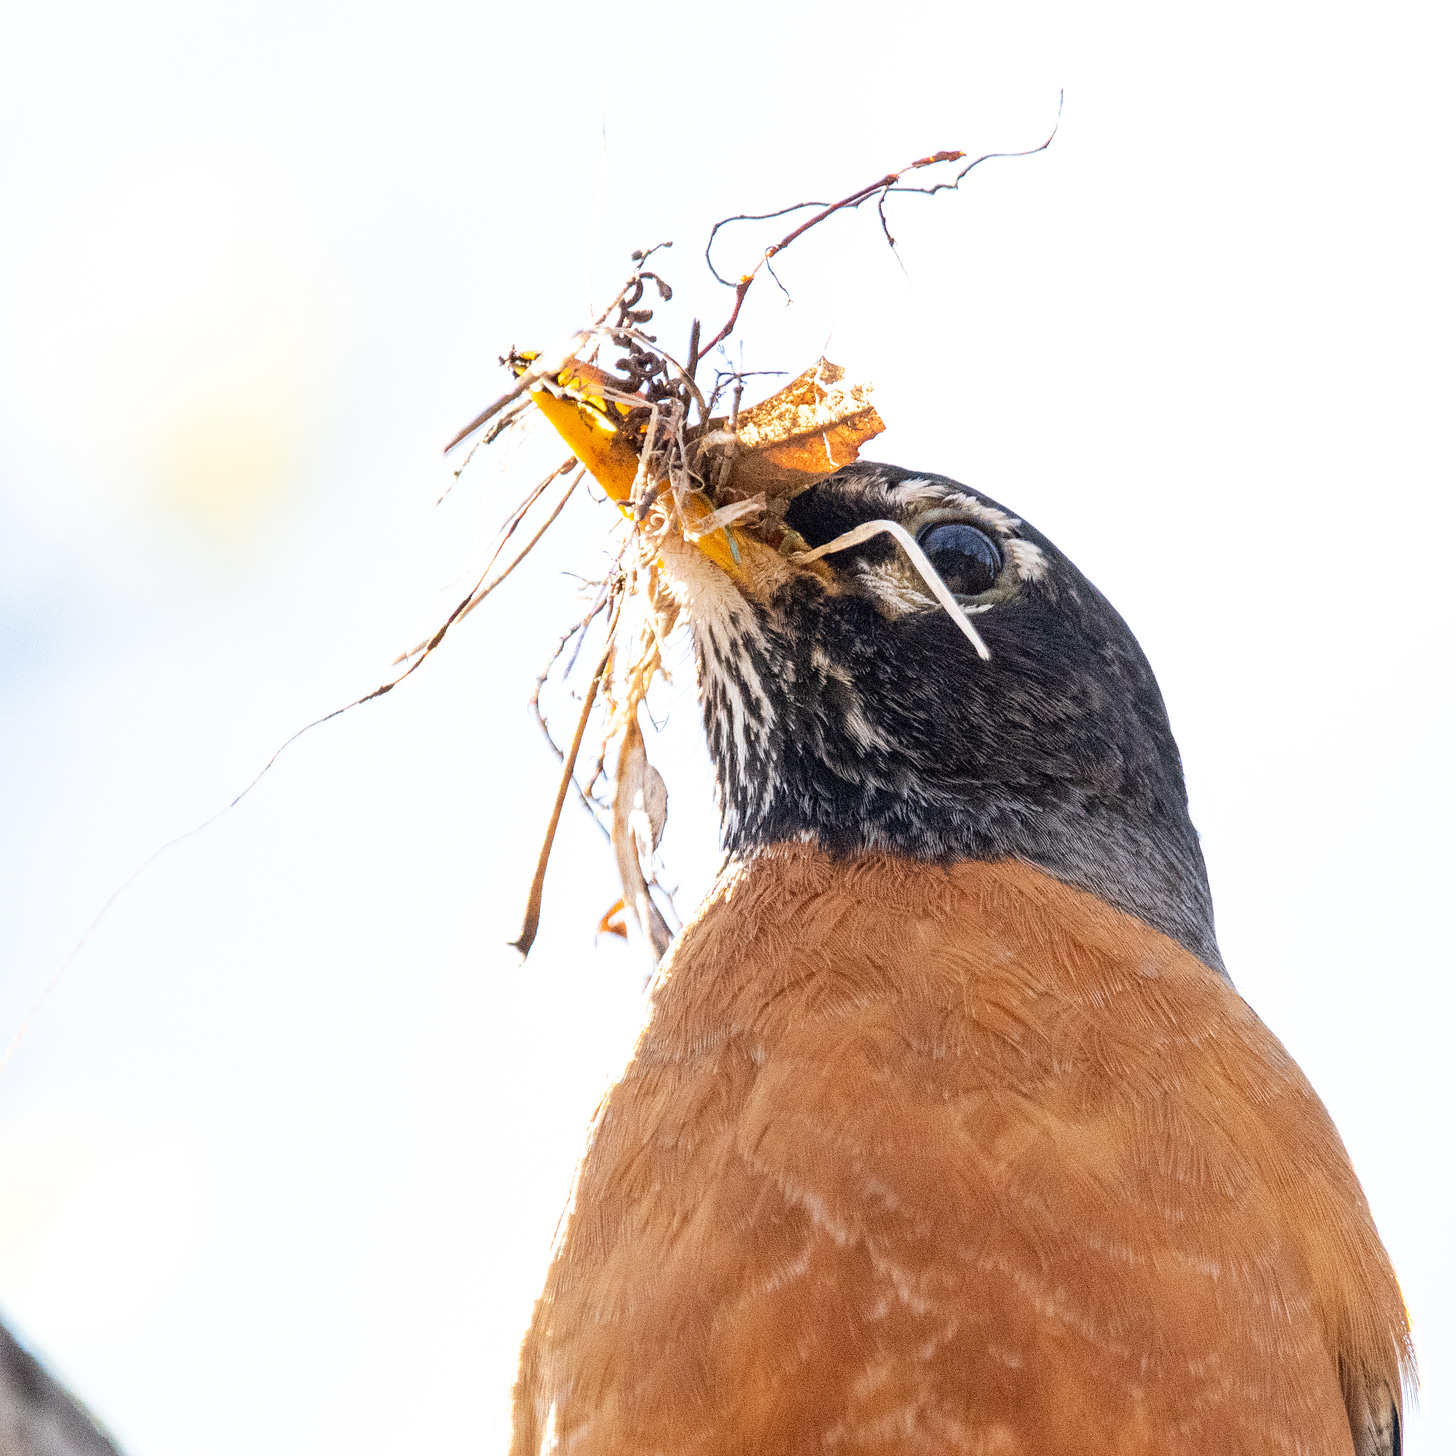 A close-up of an American robin with so much nest material in its beak that its face is obscured